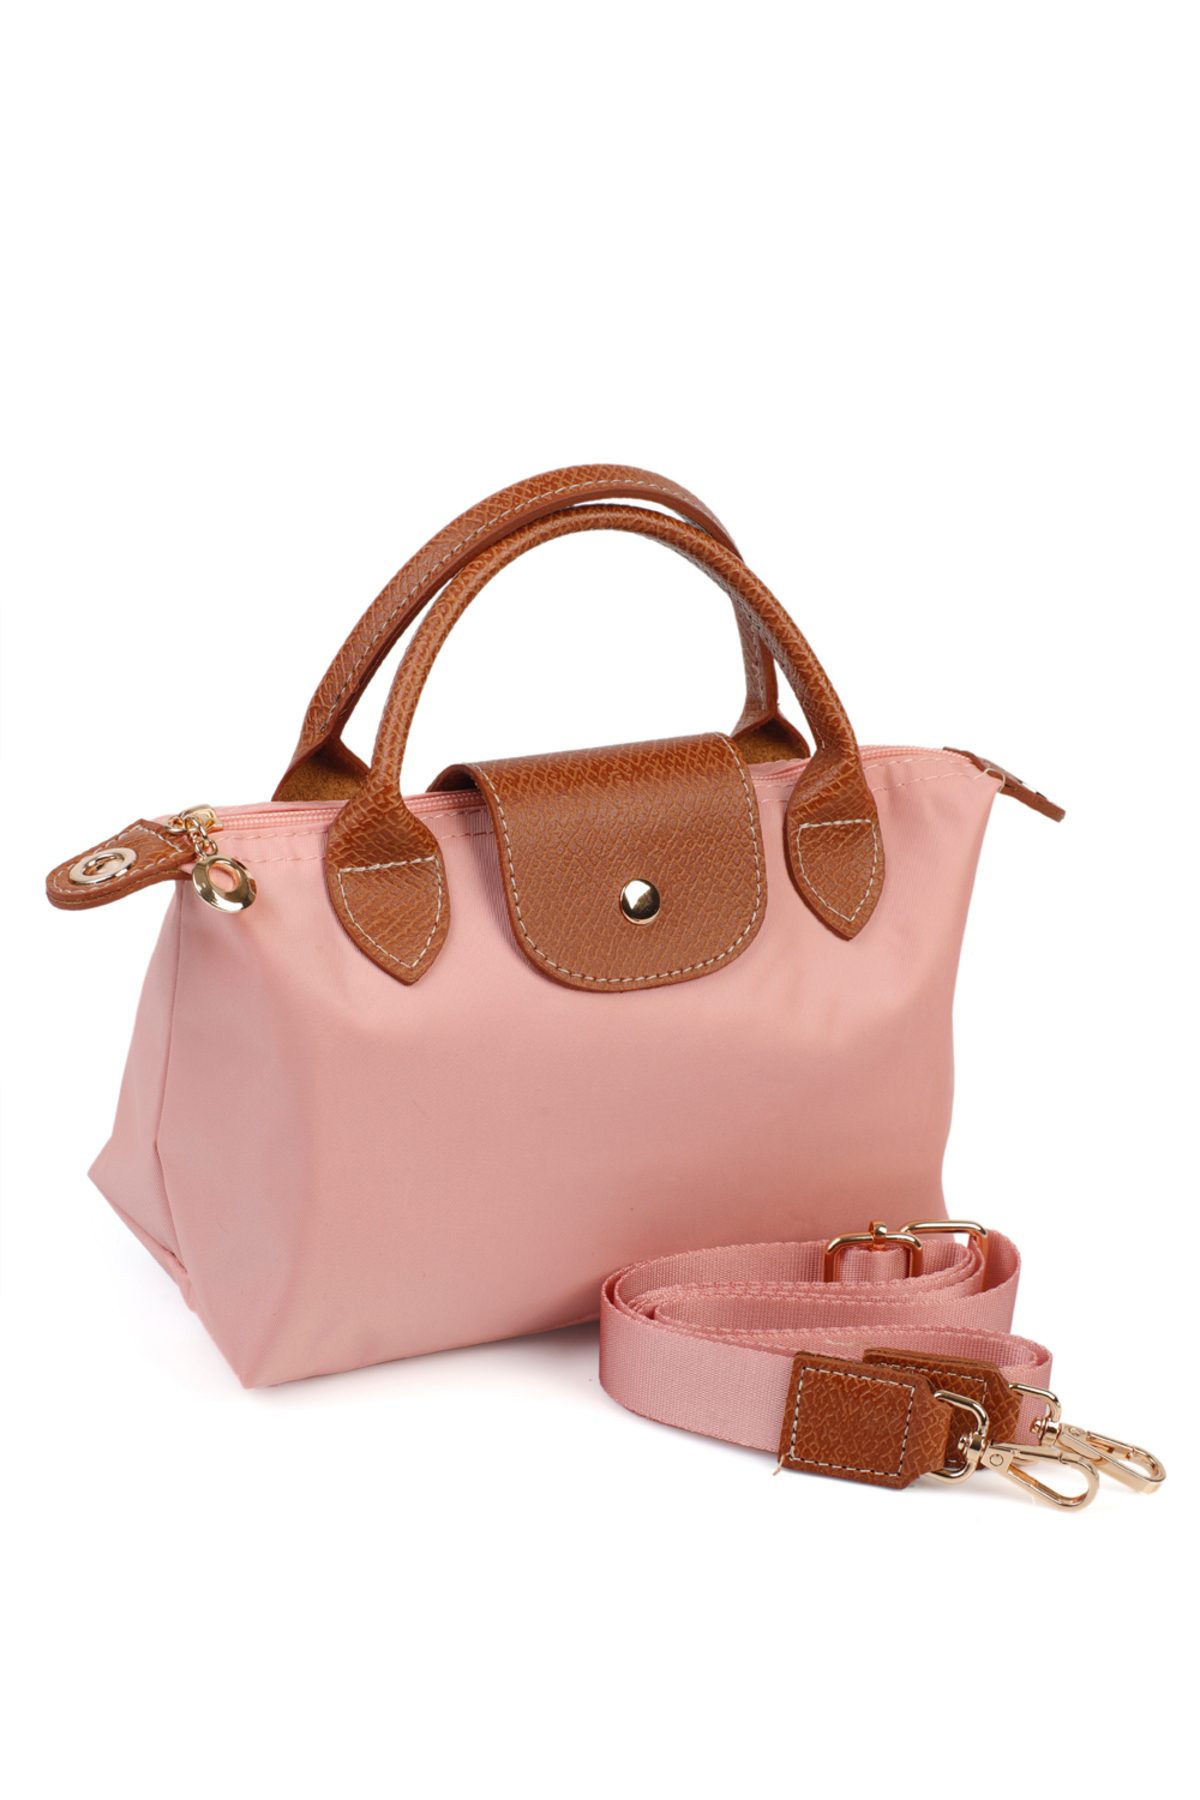 Capone Outfitters Champion Women's Bag